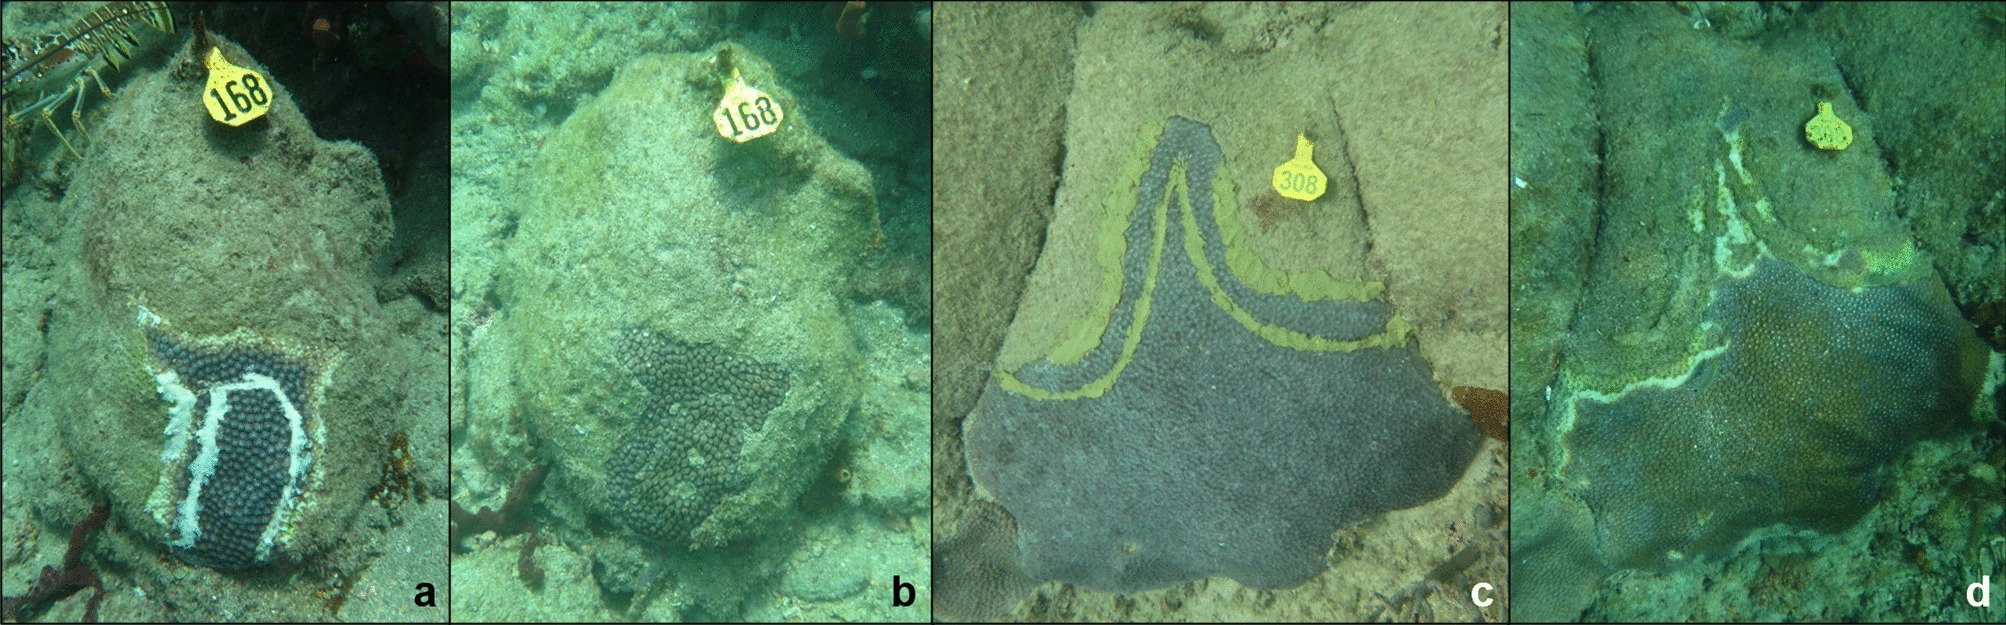 3a & 3b show a Base 2B plus amoxicillin treated colony (a) immediately after treatment application and (b) 46 weeks after treatment, with almost all initial coral tissue remaining. 3c & 3d show a representative chlorinated epoxy treated M. cavernosa colony (c) immediately after treatment and (d) nine weeks after treatment, with the lesions progressing across the trench.